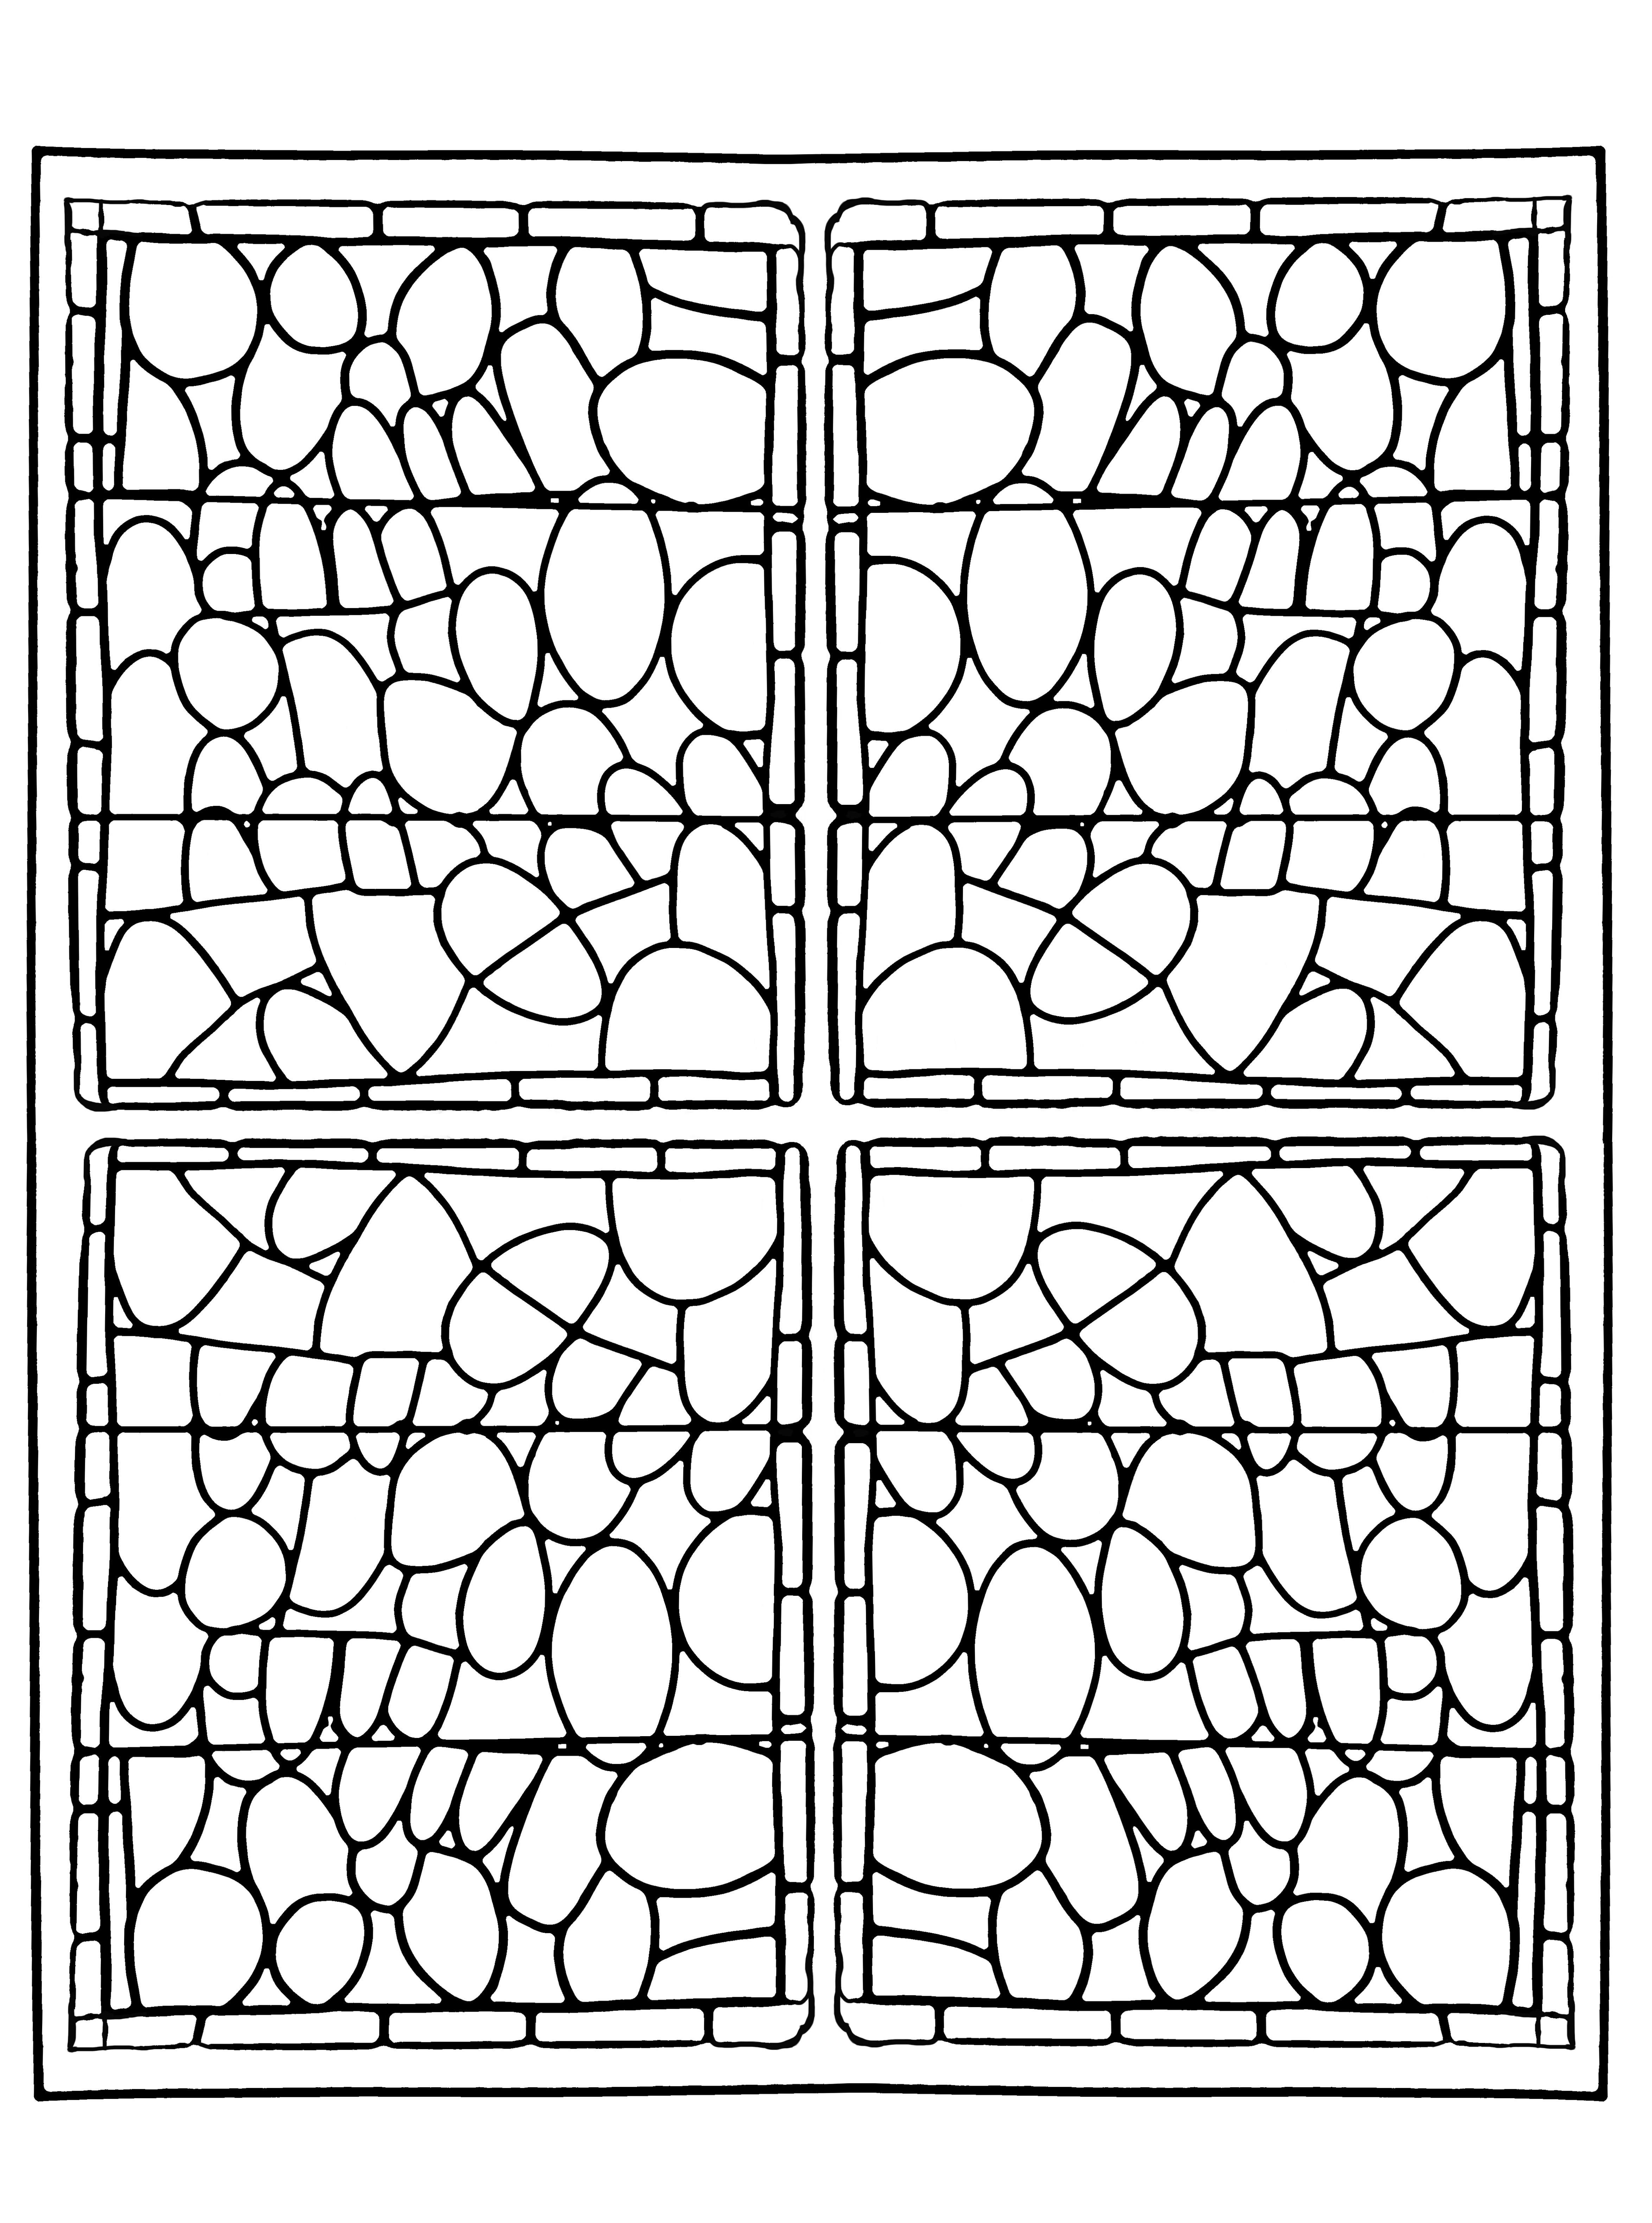 Coloring page made from a modern Stained glass : Chapel of Prieure de Bethleem, Nîmes, France - version 3